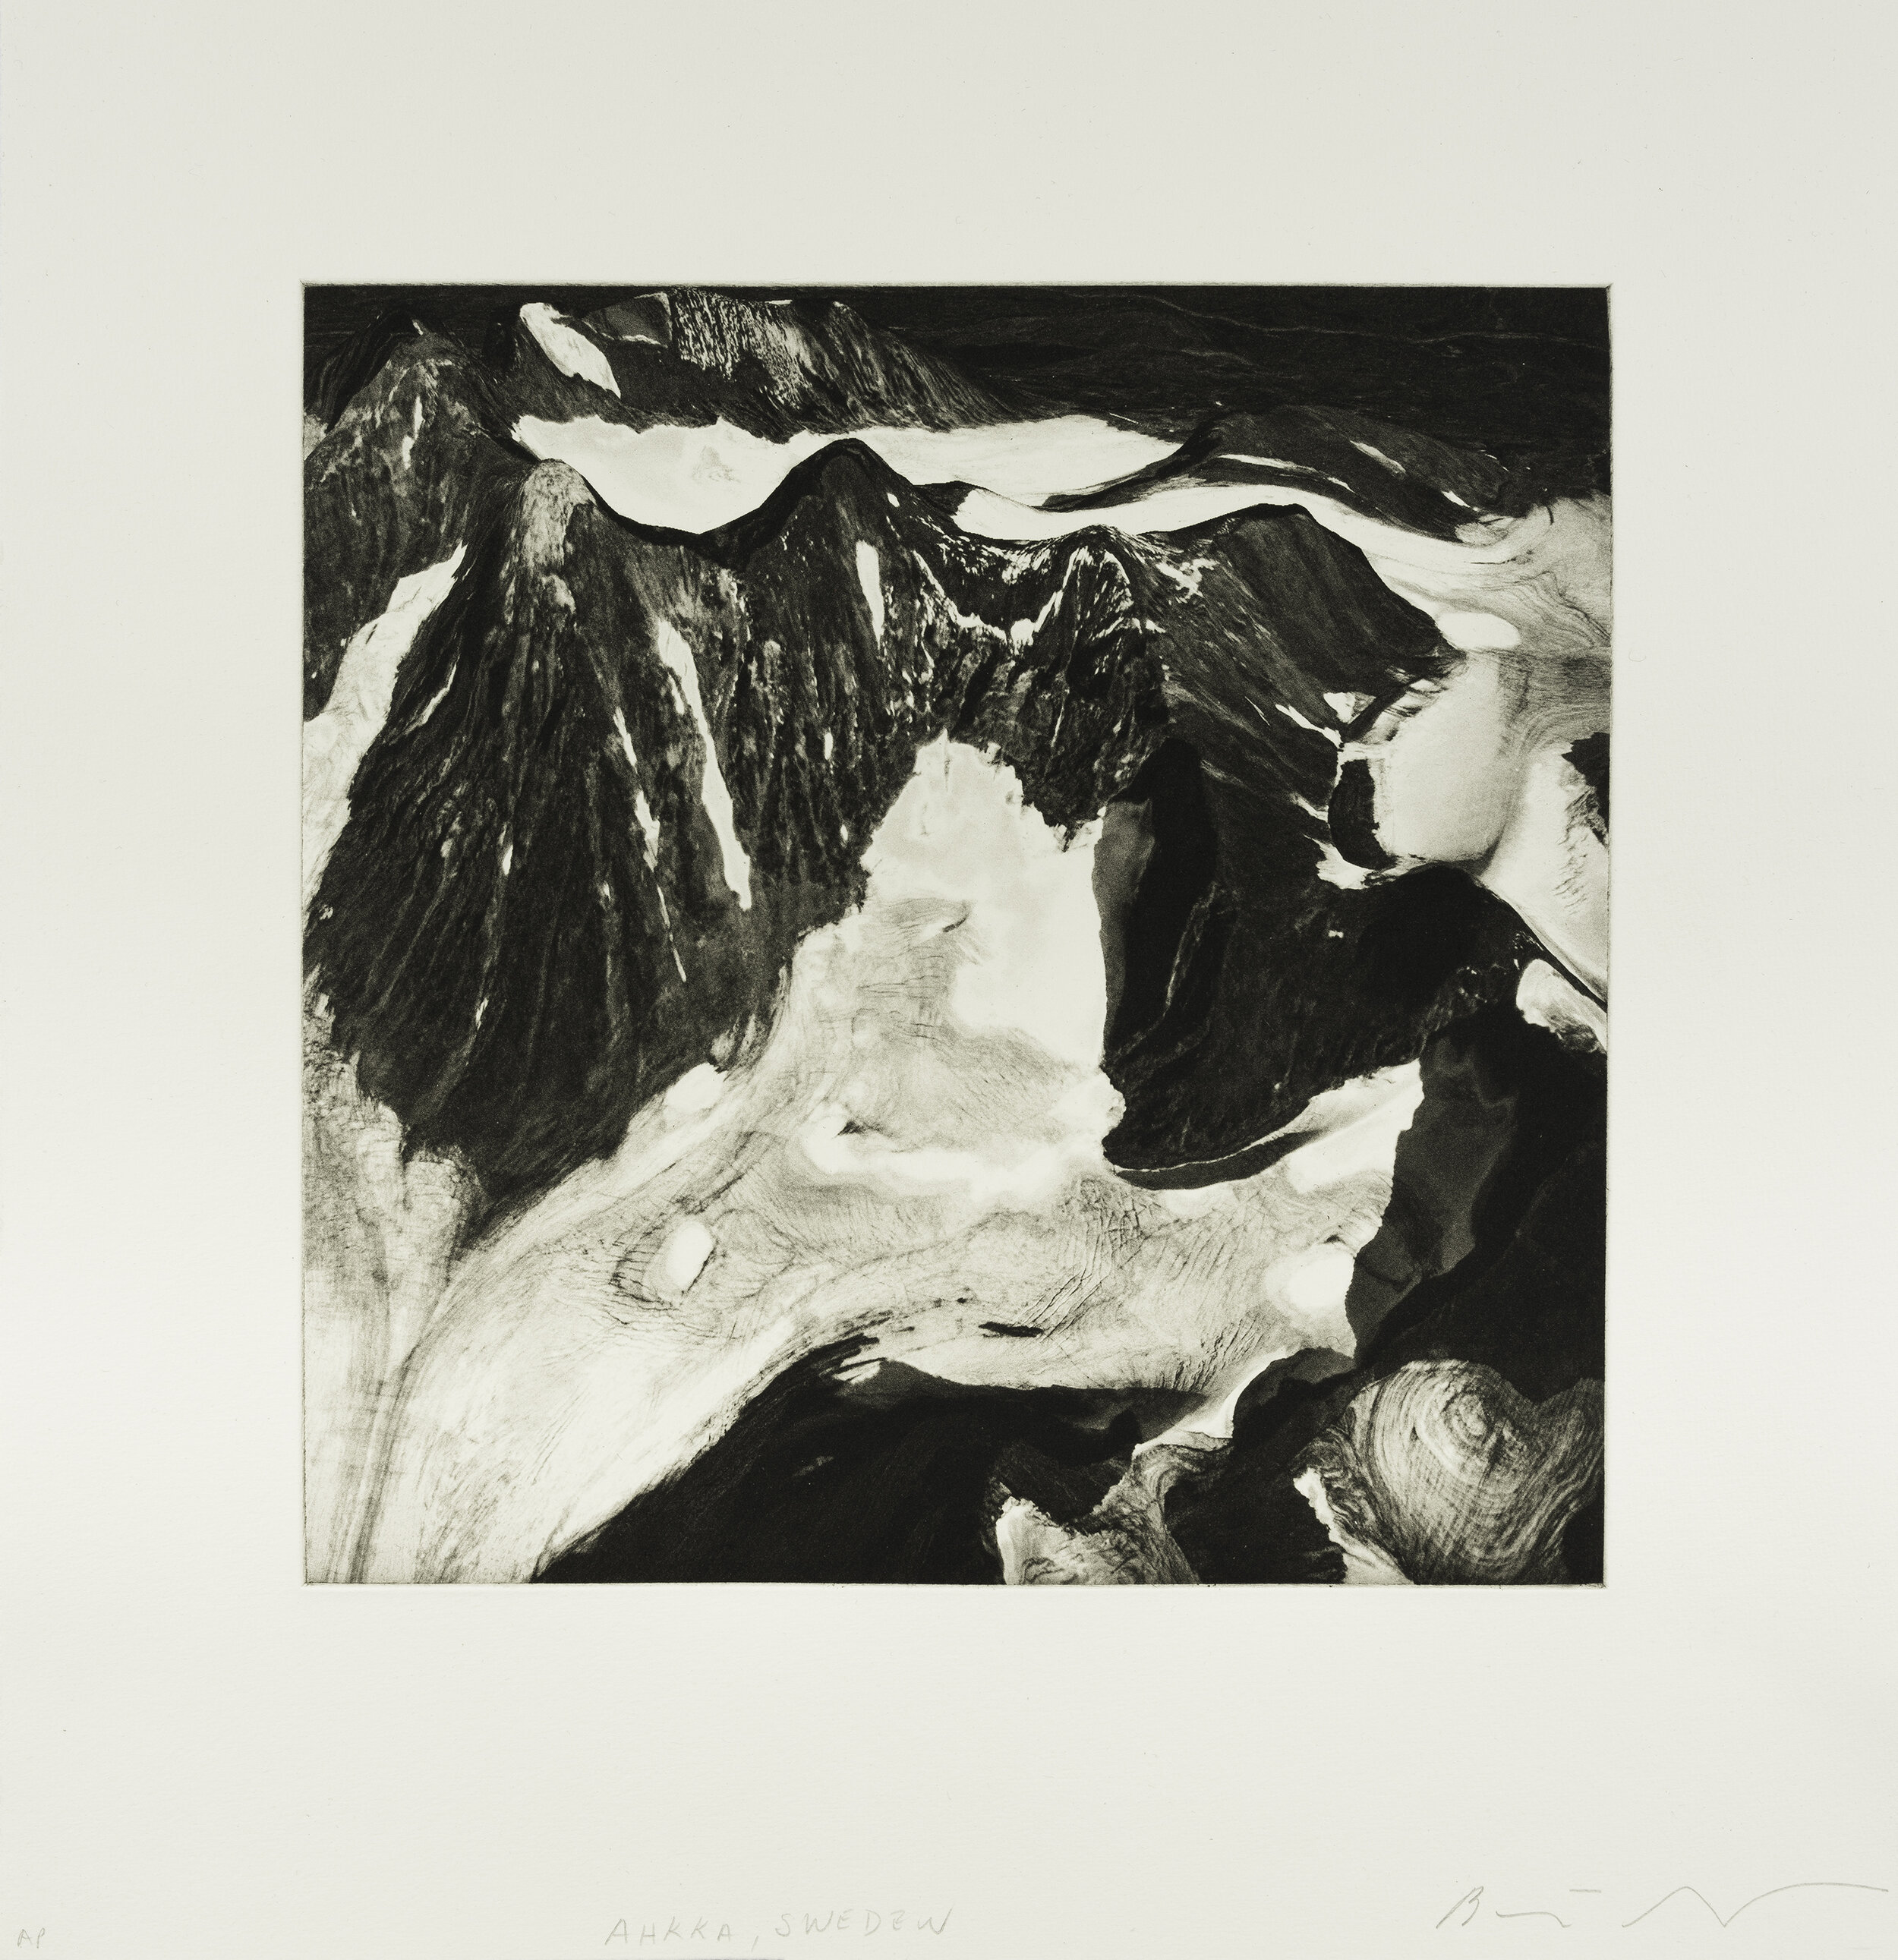    Ahkka, Sweden, 2020   Copperplate photogravure etching on cotton rag paper, plate size; 10.6 x 10.6, paper size; 16 x 15.5, edition 10  